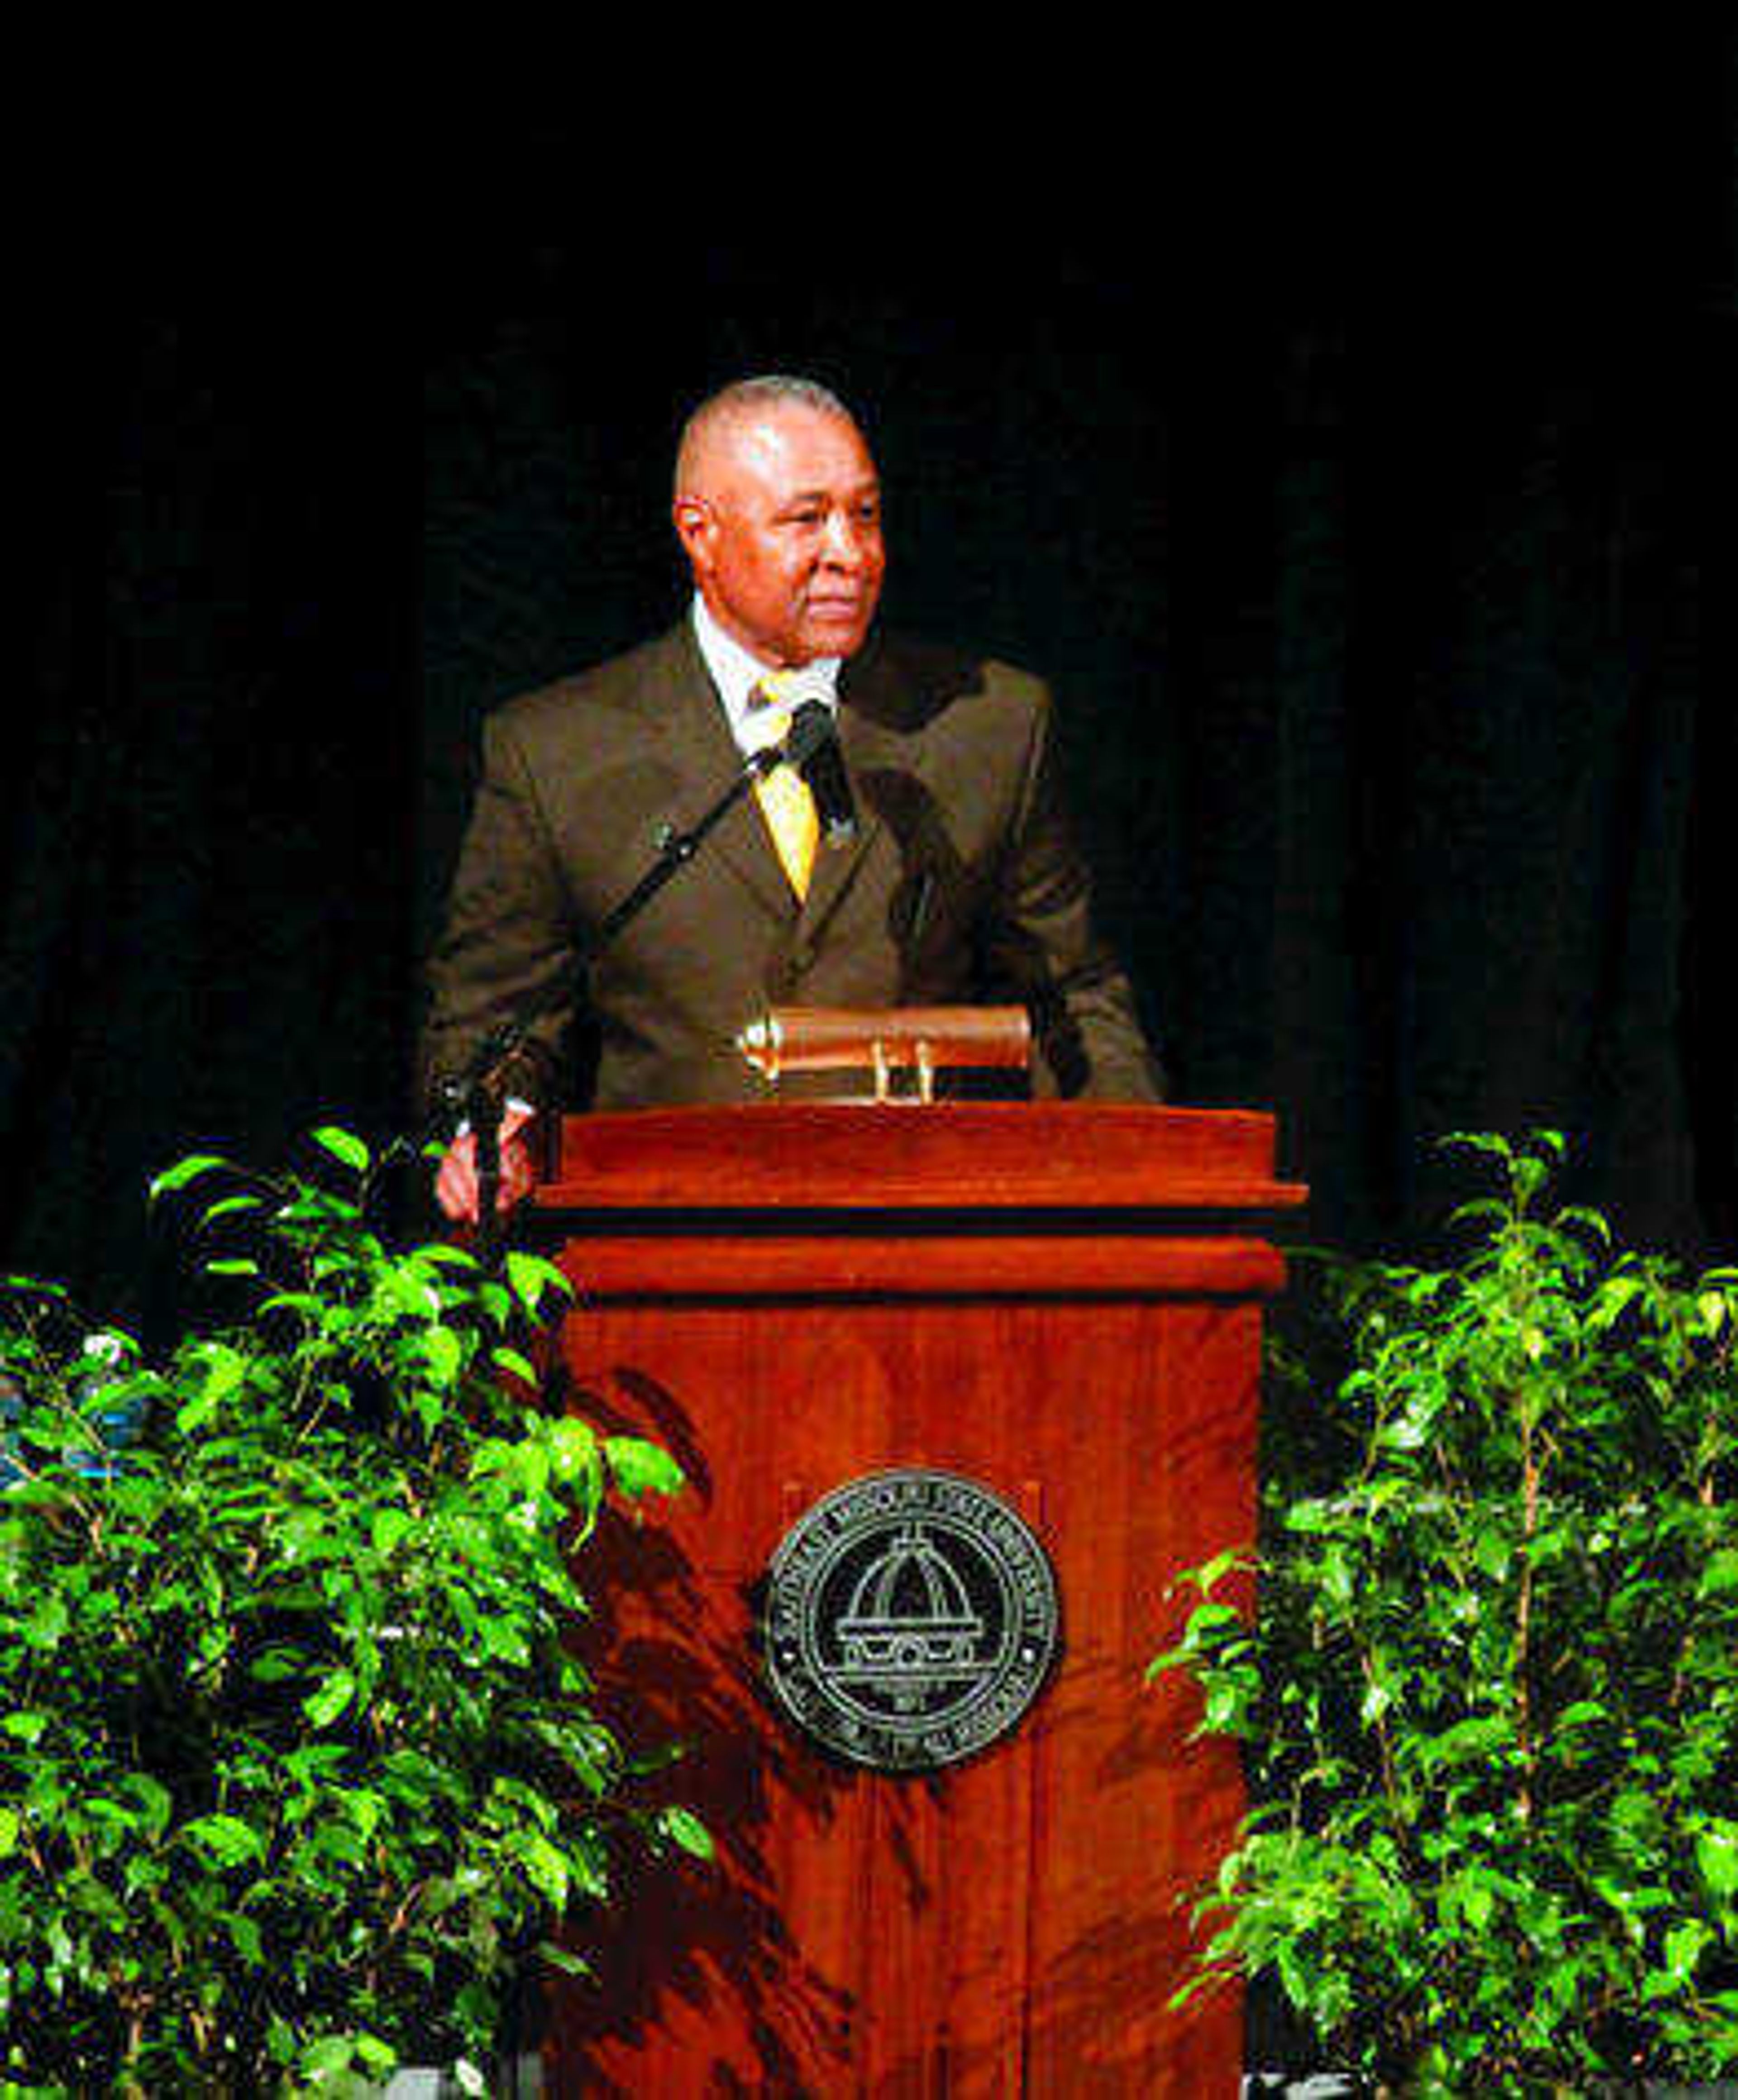 Ozzie Smith during his speech on April 20 at the Show Me Center. Photo by Sean Burke